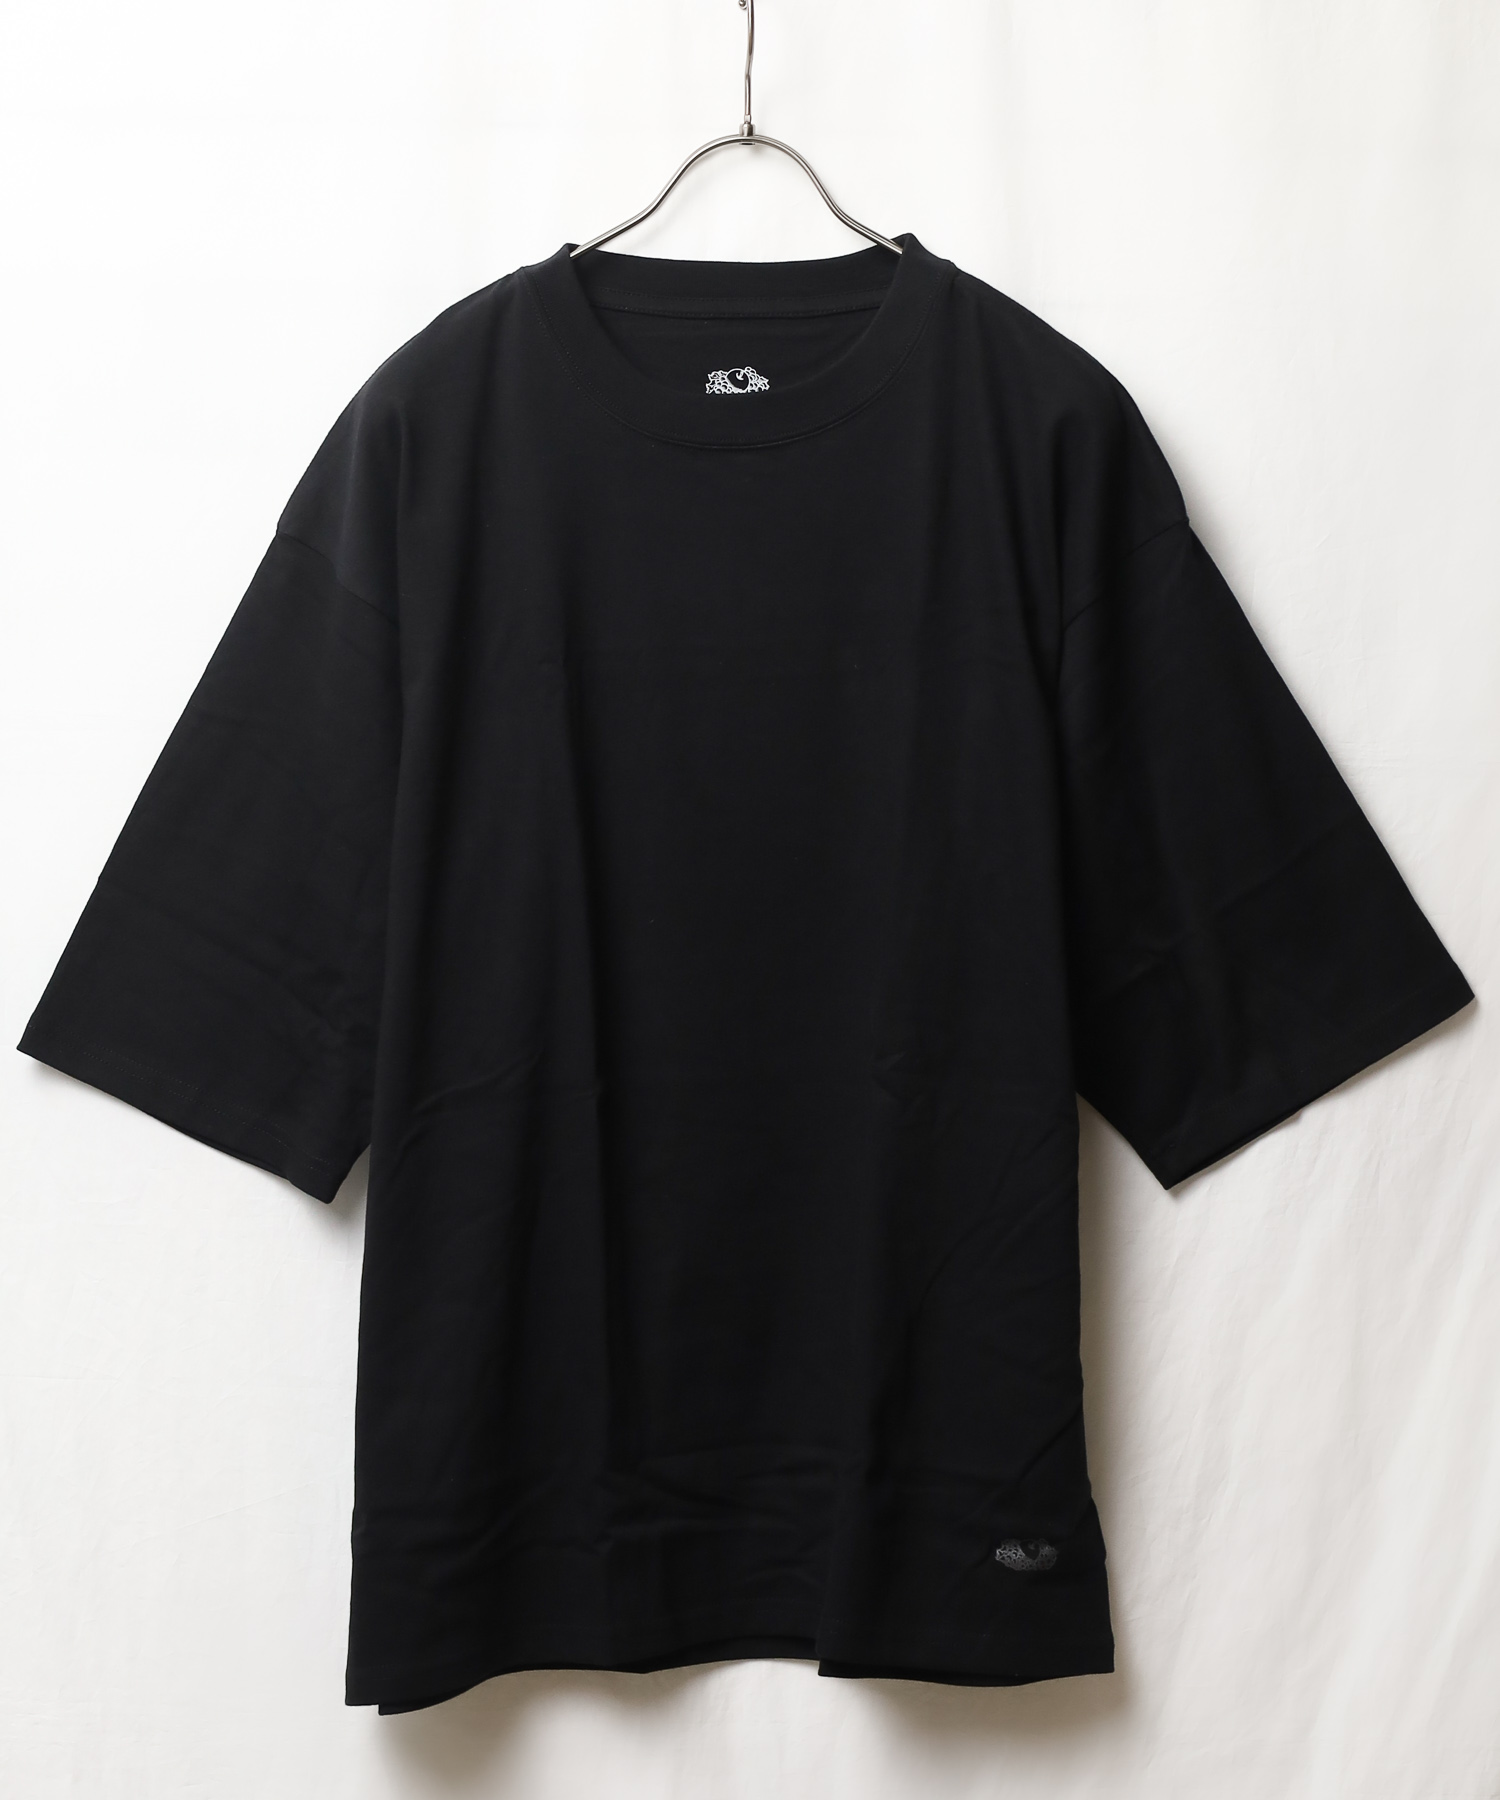 【78】【FRUIT OF THE LOOM】【17210400】7oz HEAVY WEIGHT BIG T